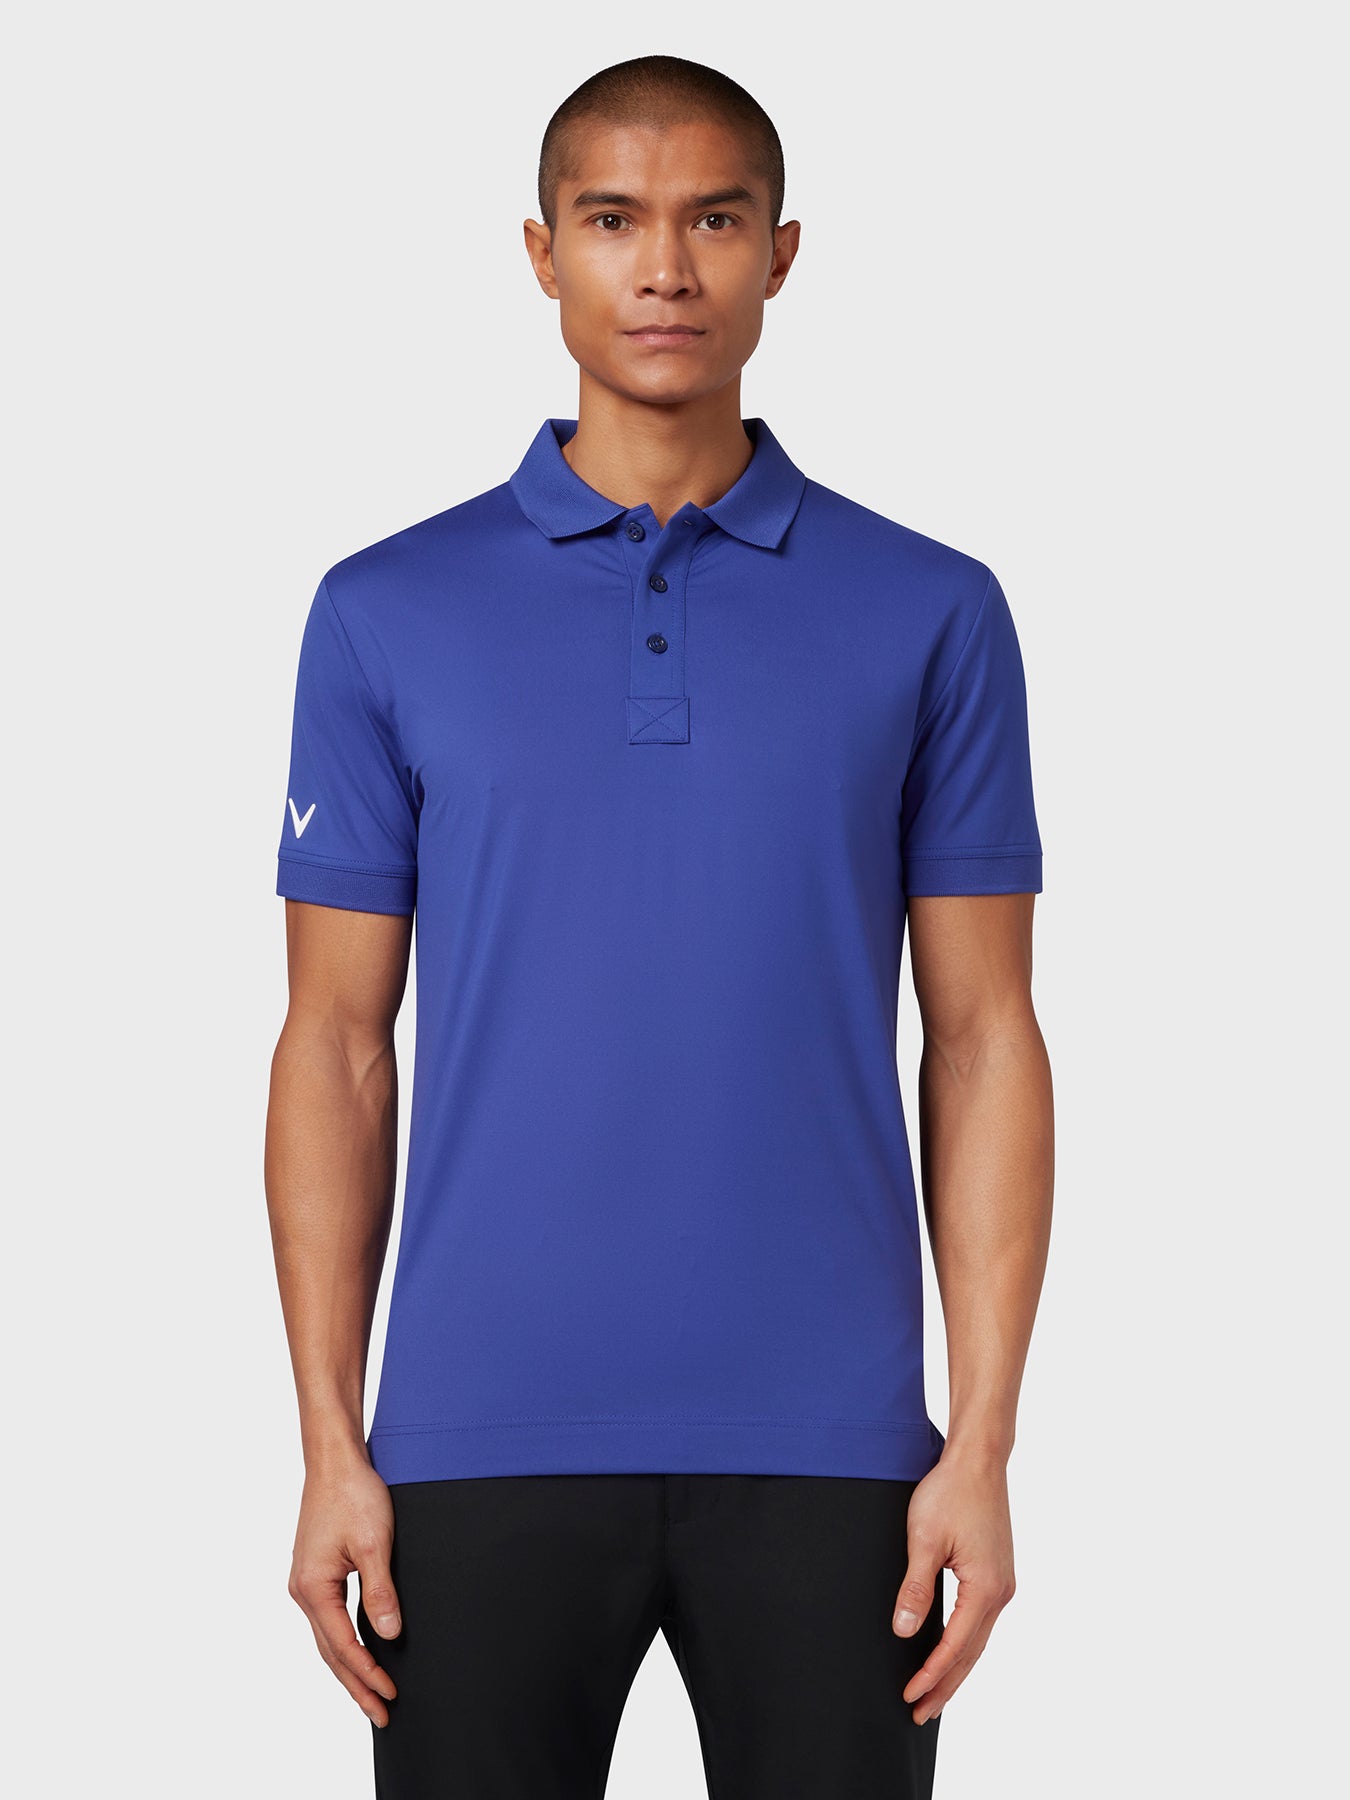 View X Series Solid Ribbed Polo In Clematis Blue information